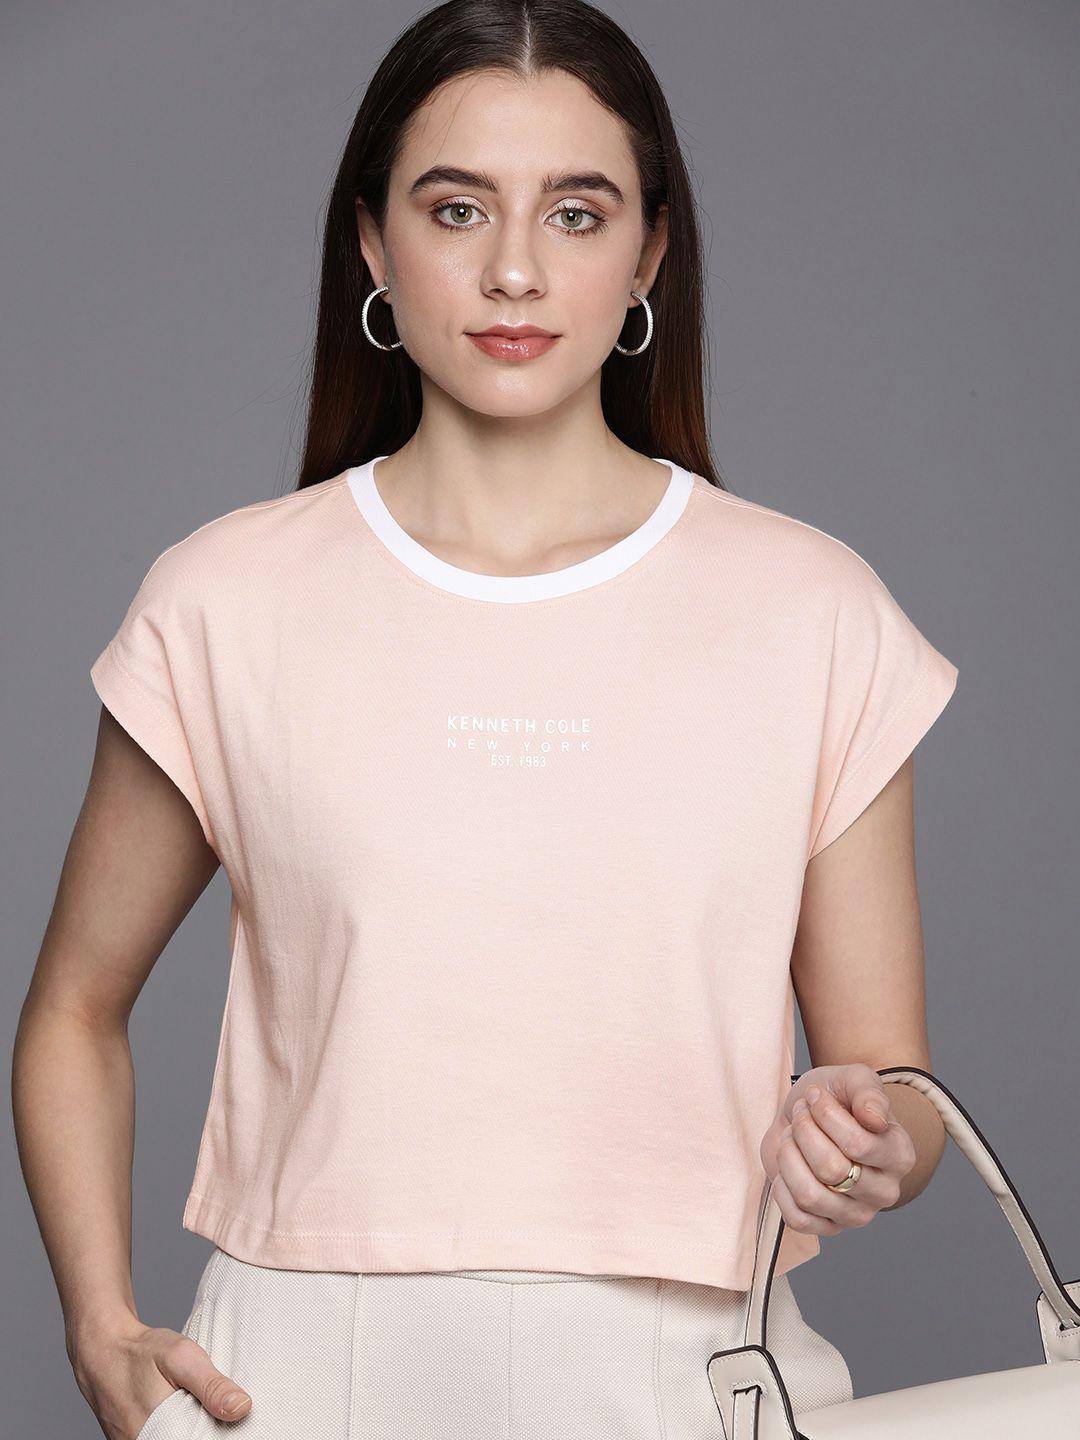 kenneth cole signature tee women pink brand logo printed pure cotton t-shirt